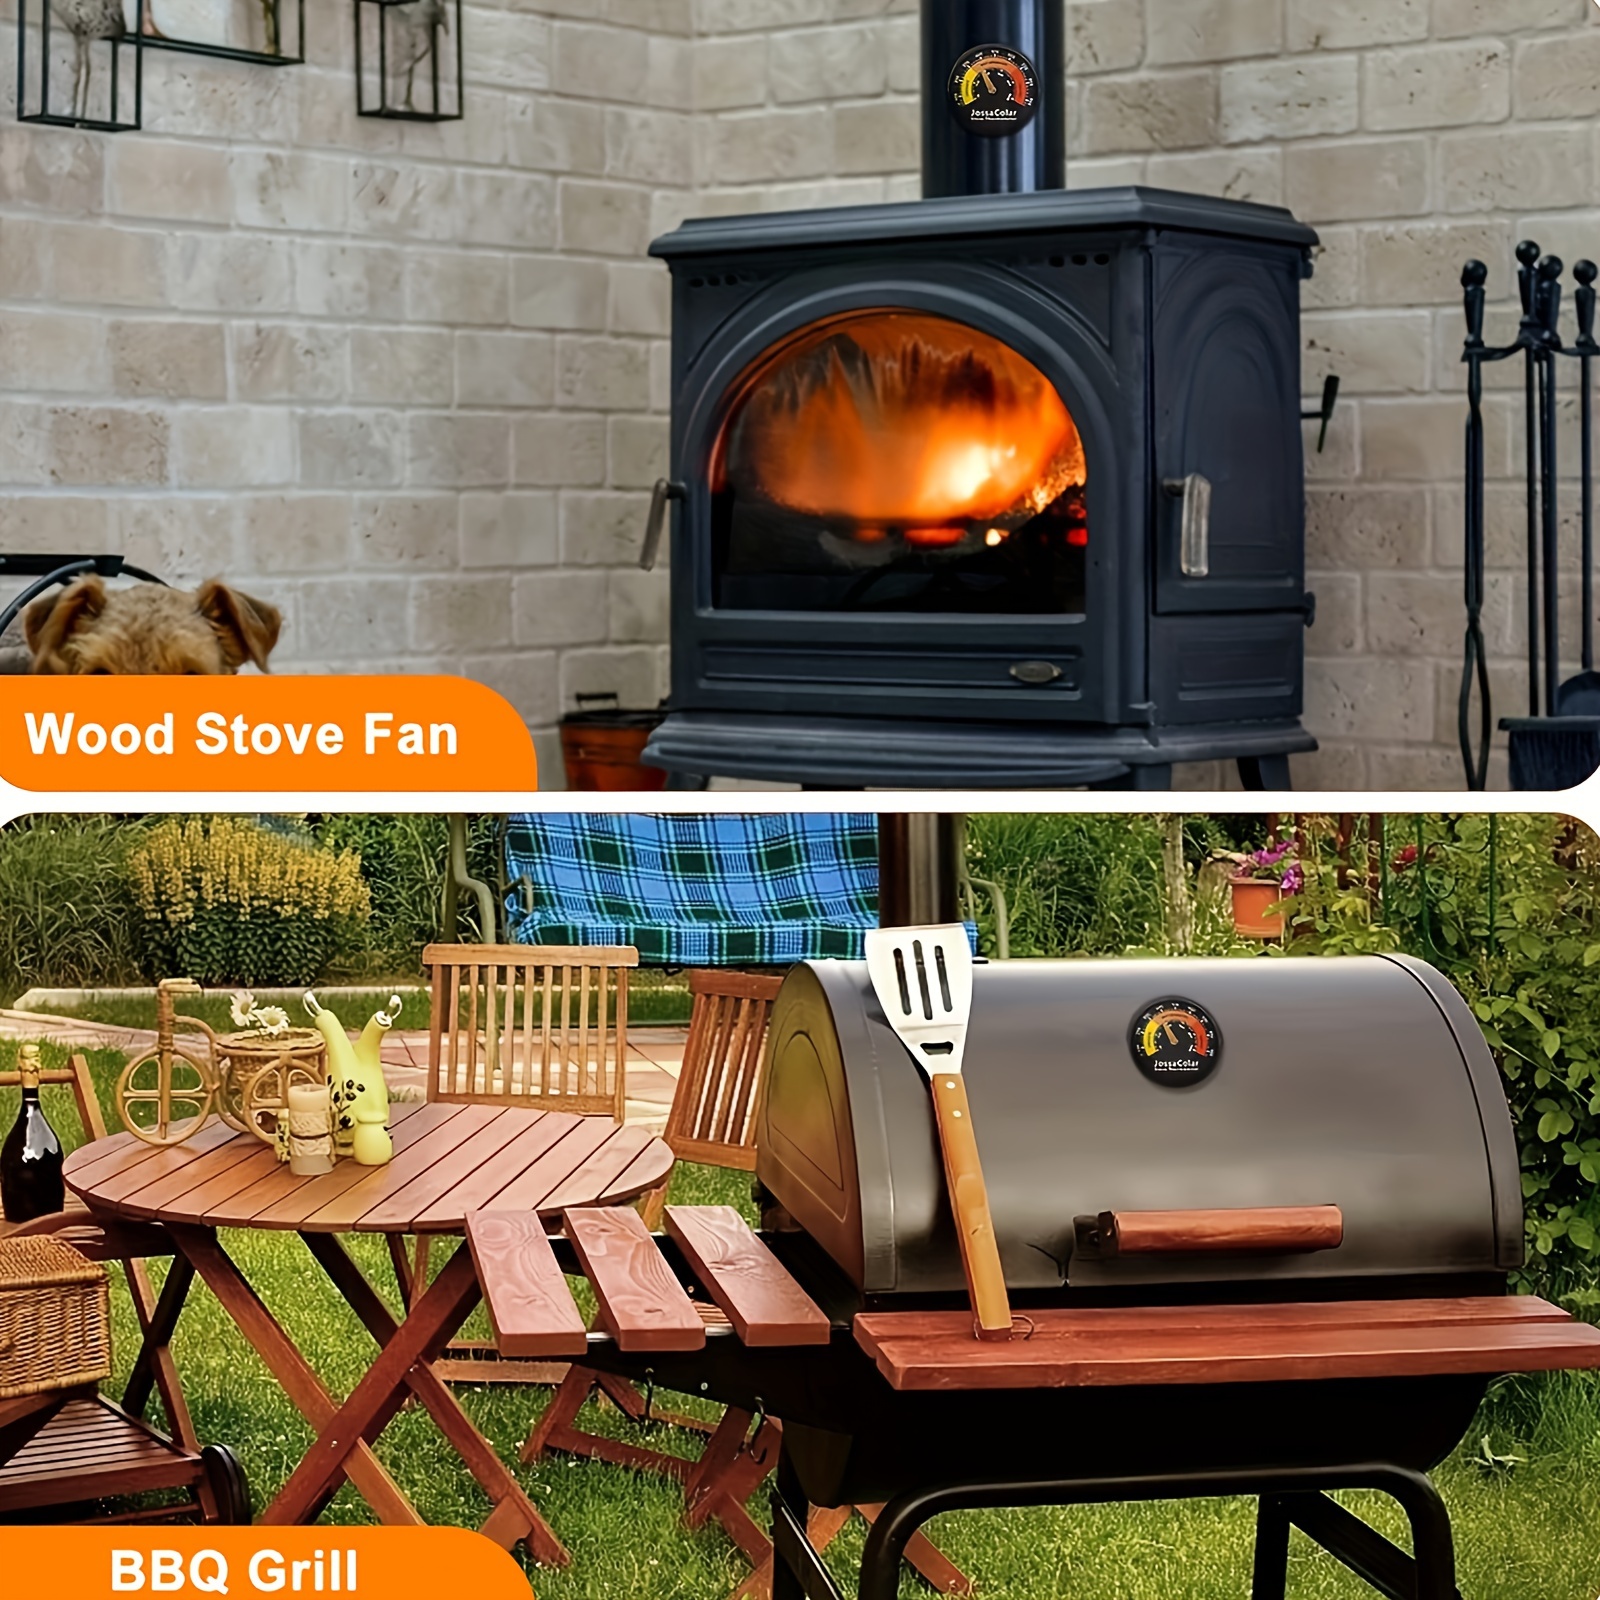 Xmasneed Wood Stove Thermometer Magnetic Oven Stove Temperature Stove Top Thermometer for Wood Burning Stoves GAS Stoves Pellet Stove Avoiding Stove F